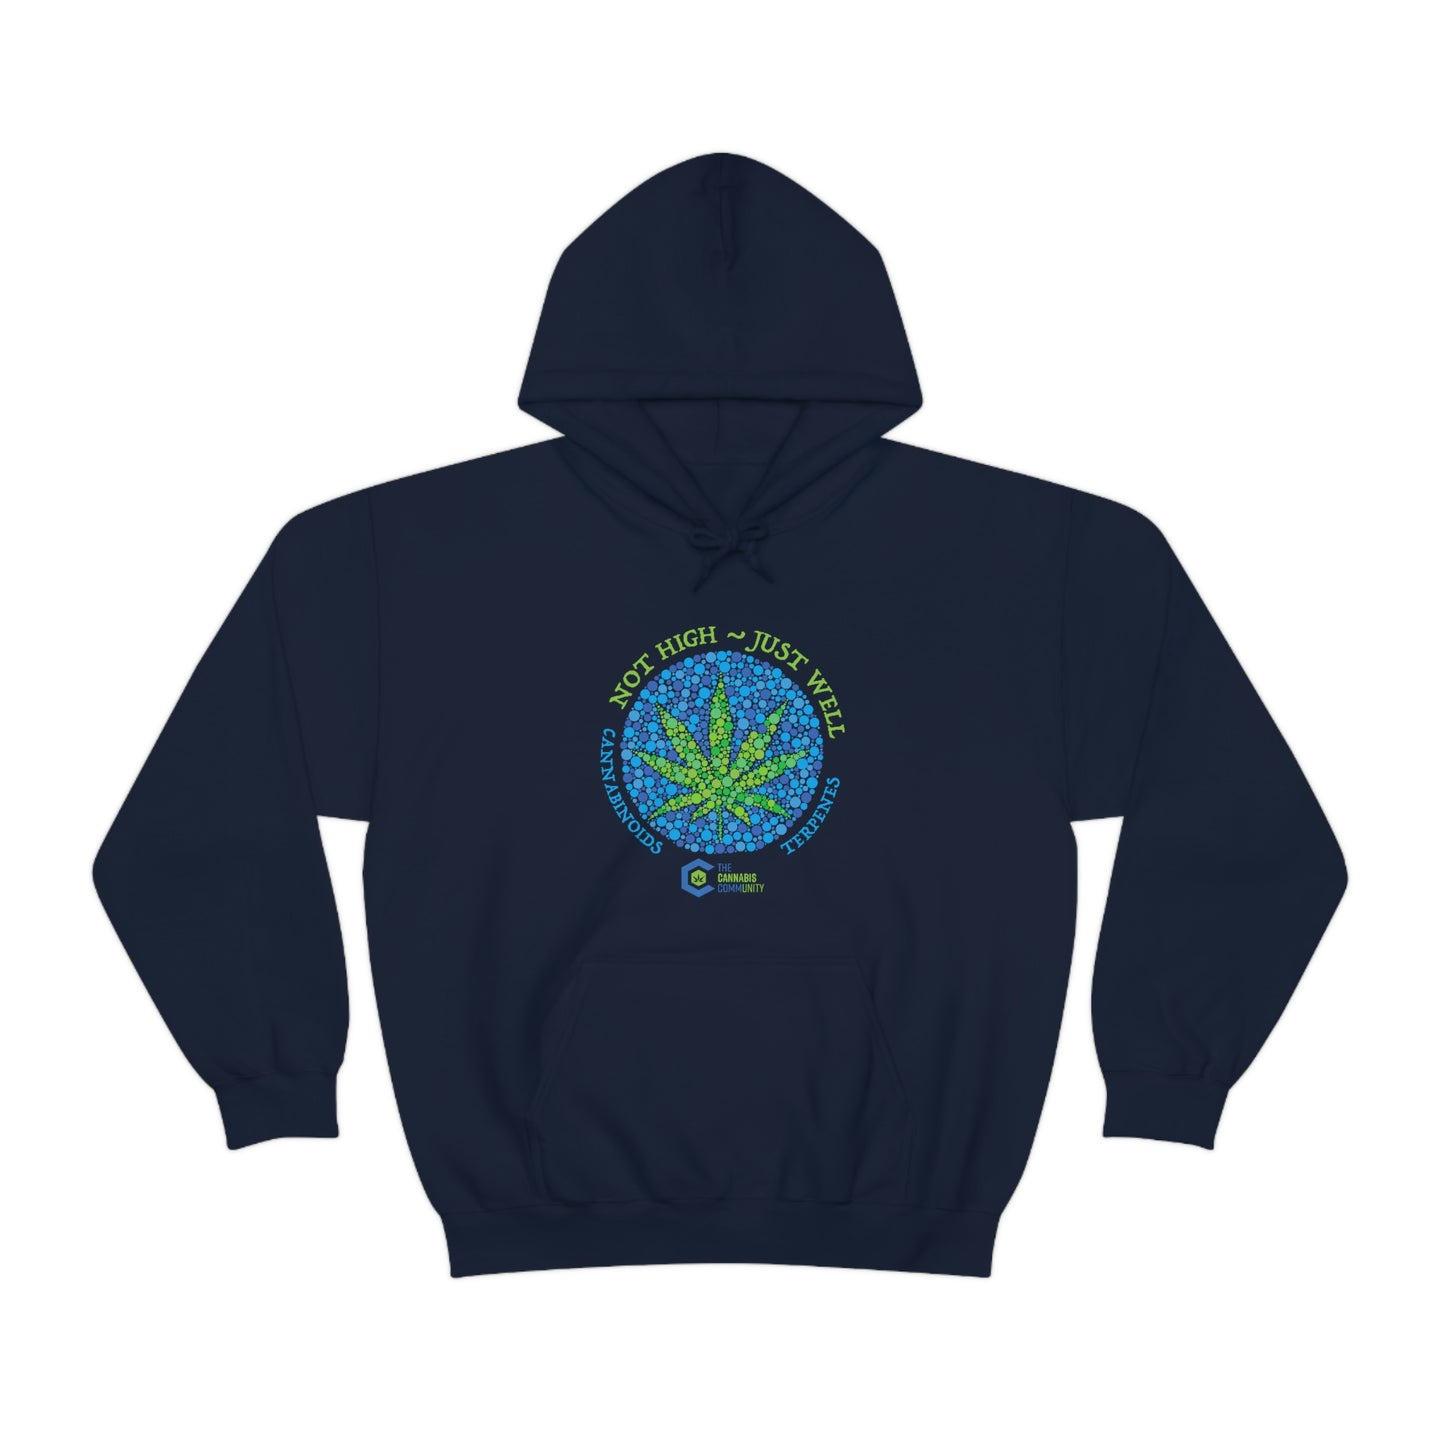 A navy blue Not High, Just Well Cannabis Hoodie with an image of a marijuana leaf.